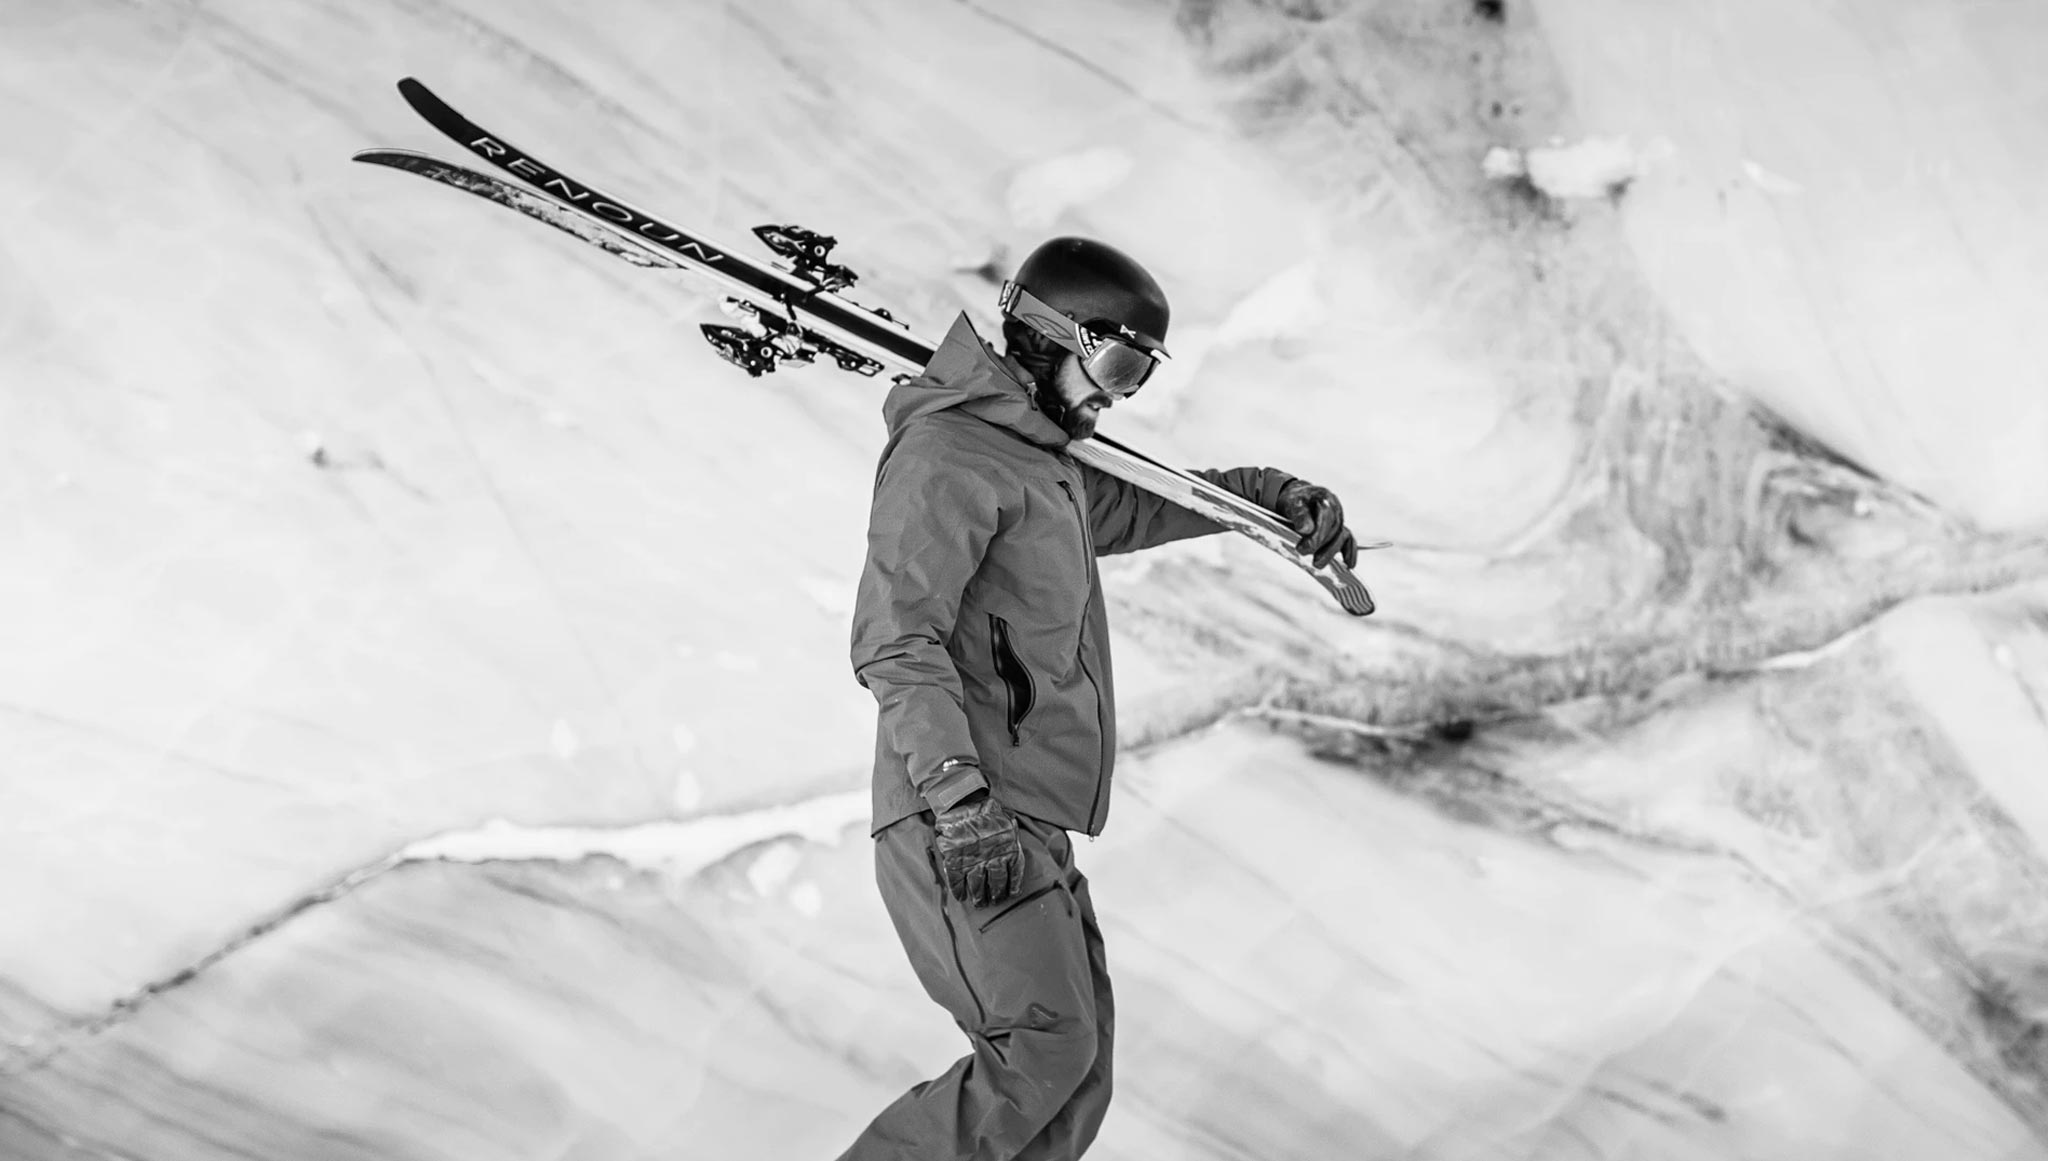 Ski Weight – Why a ski’s weight matters (but not that much) – Renoun Skis